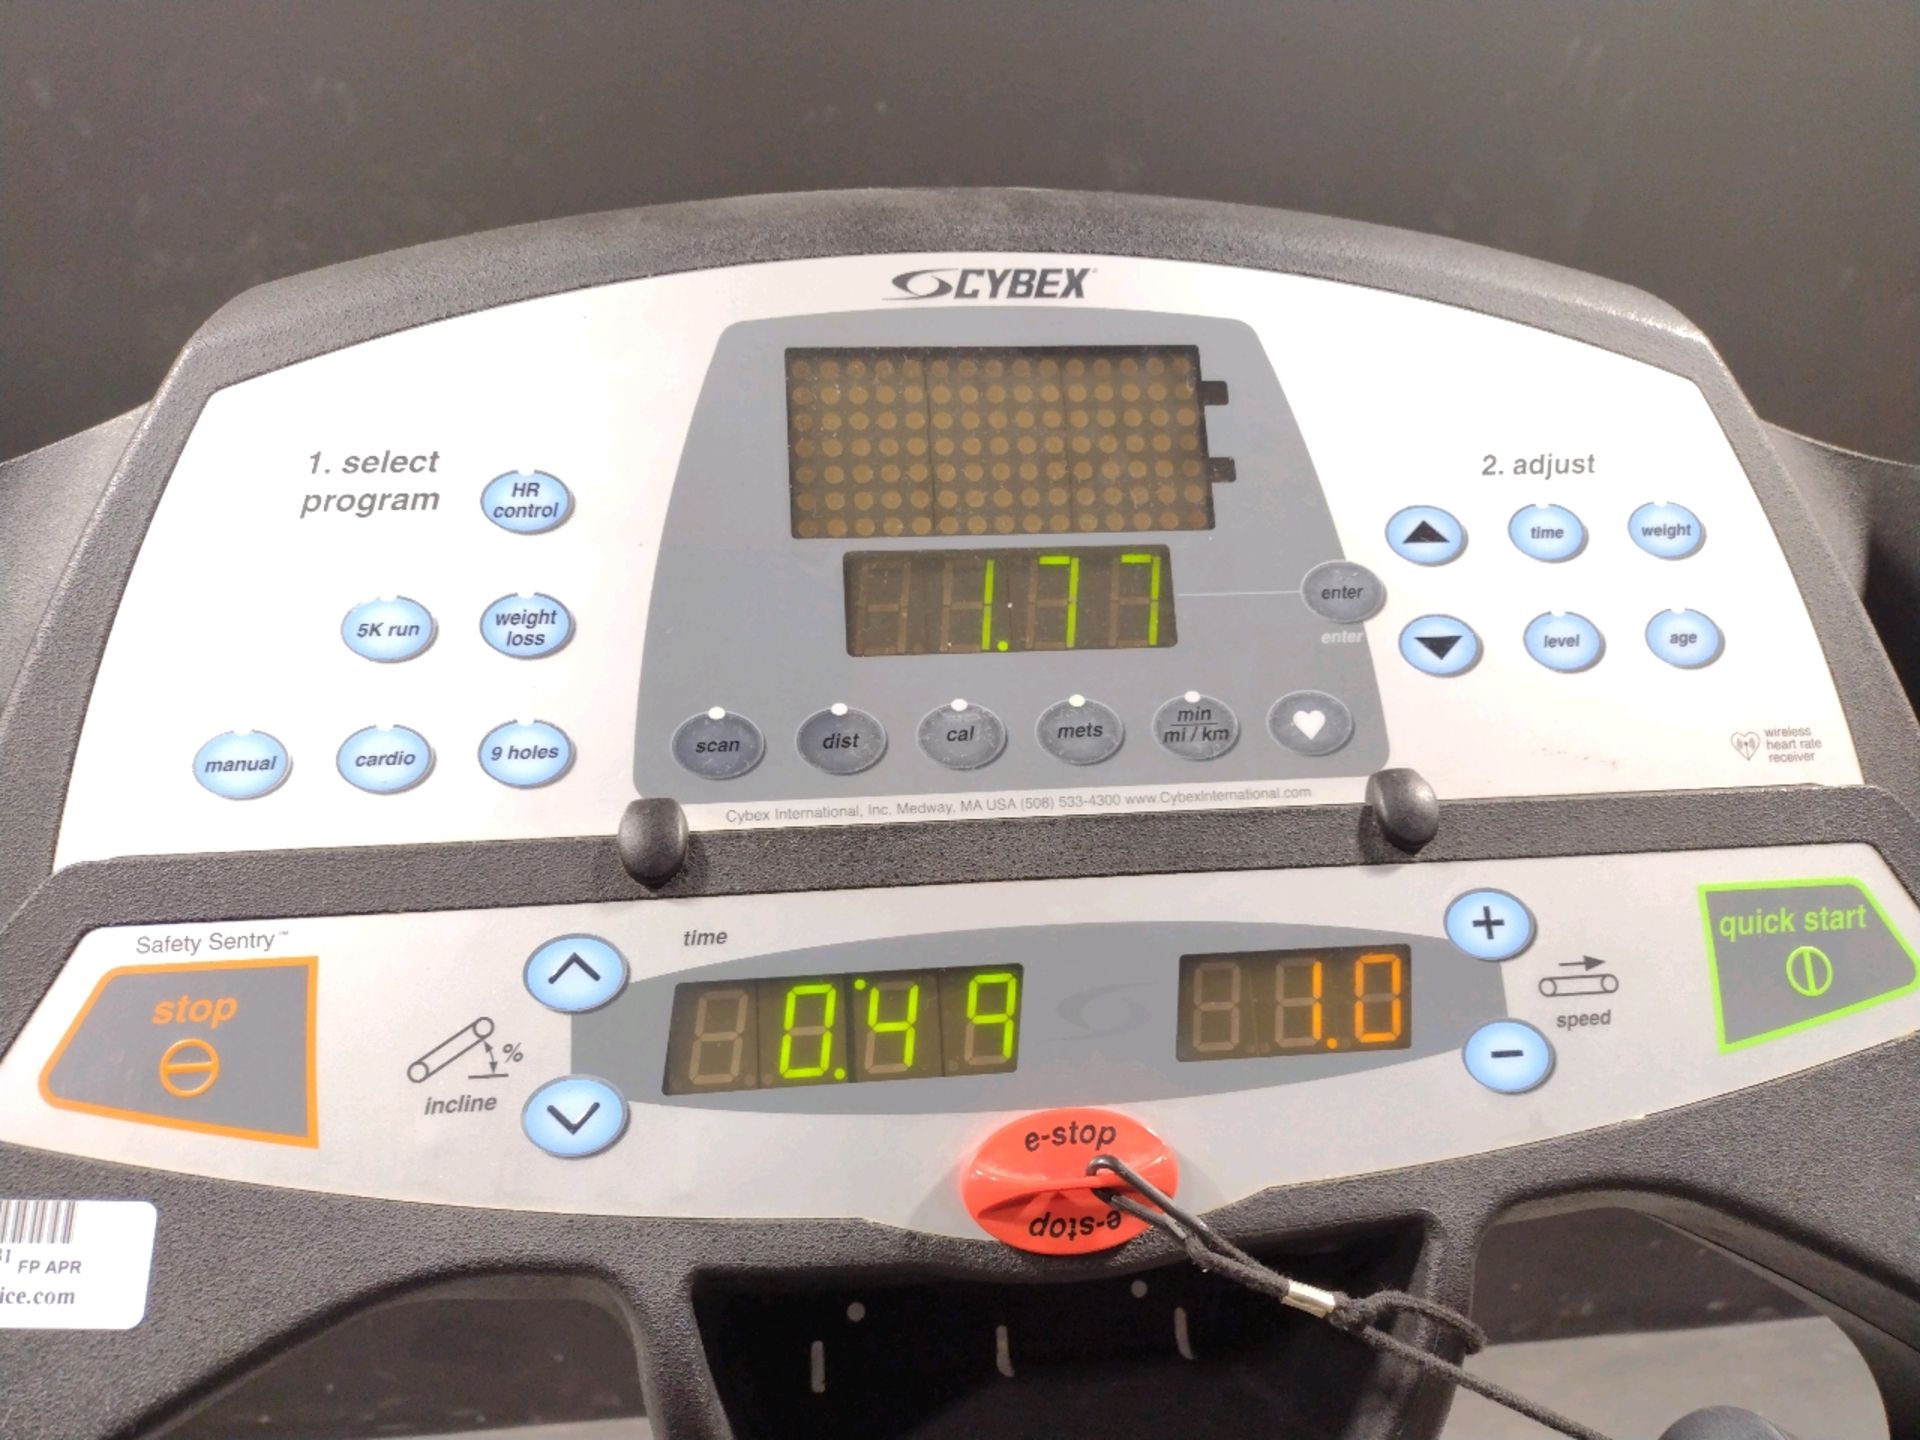 CYBEX PRO PLUS TREADMILL (LOCATED AT 3325 MOUNT PROSPECT ROAD, FRANKLIN PARK, IL, 60131) - Image 2 of 3